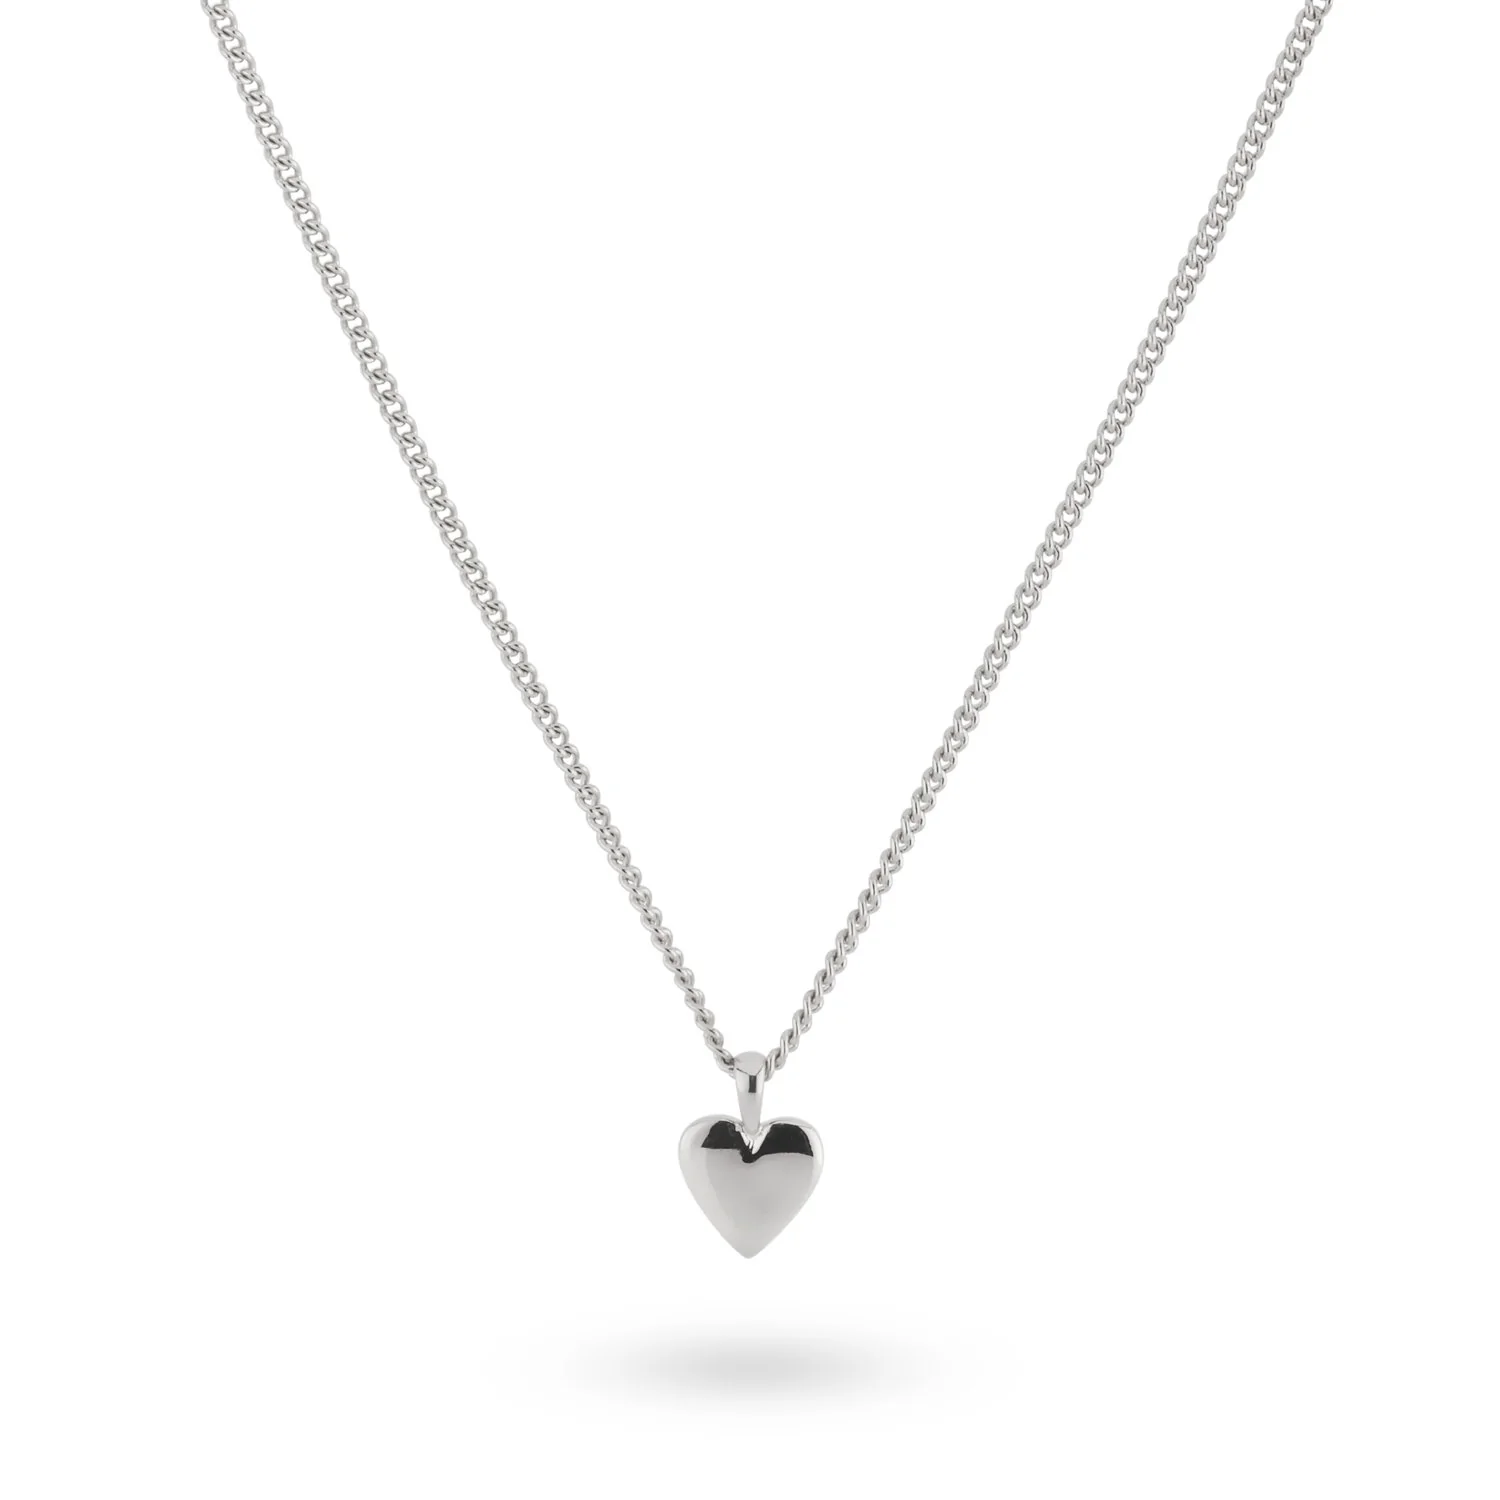 24Kae Silver Necklace with Small Heart